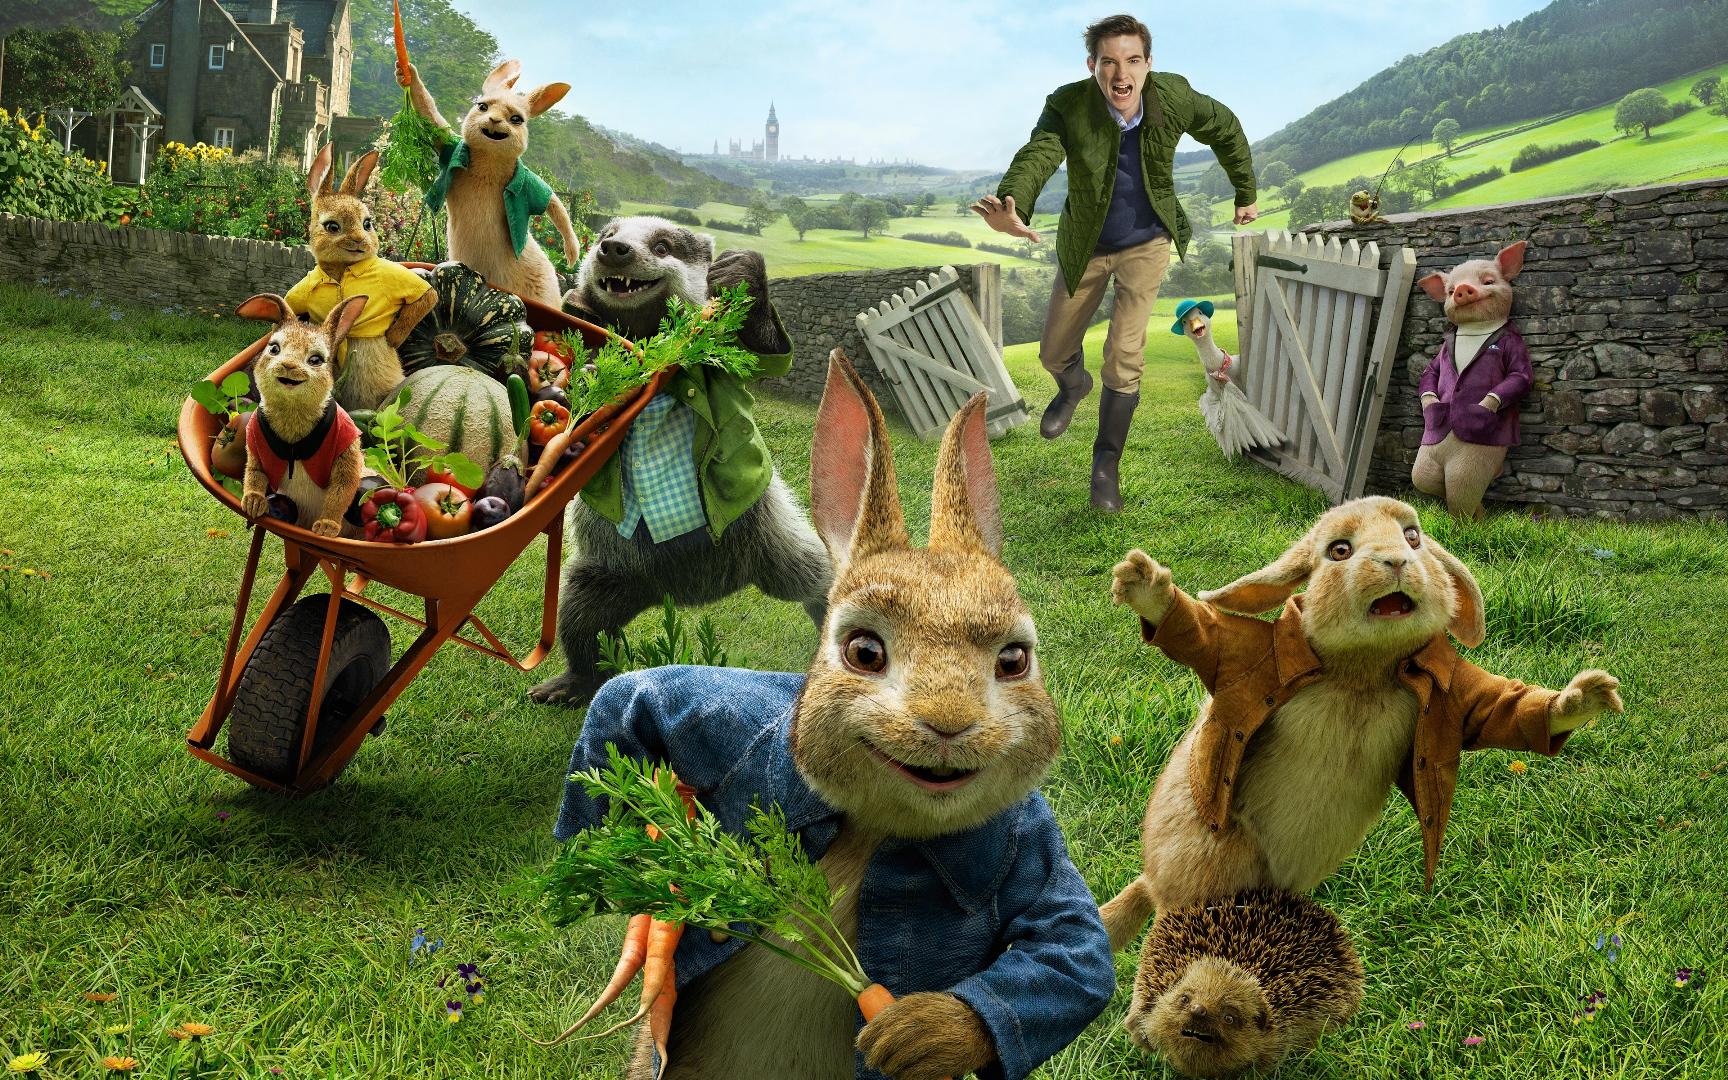 (POSTPONED) Peter Rabbit - Free movie at Beenleigh Town Square